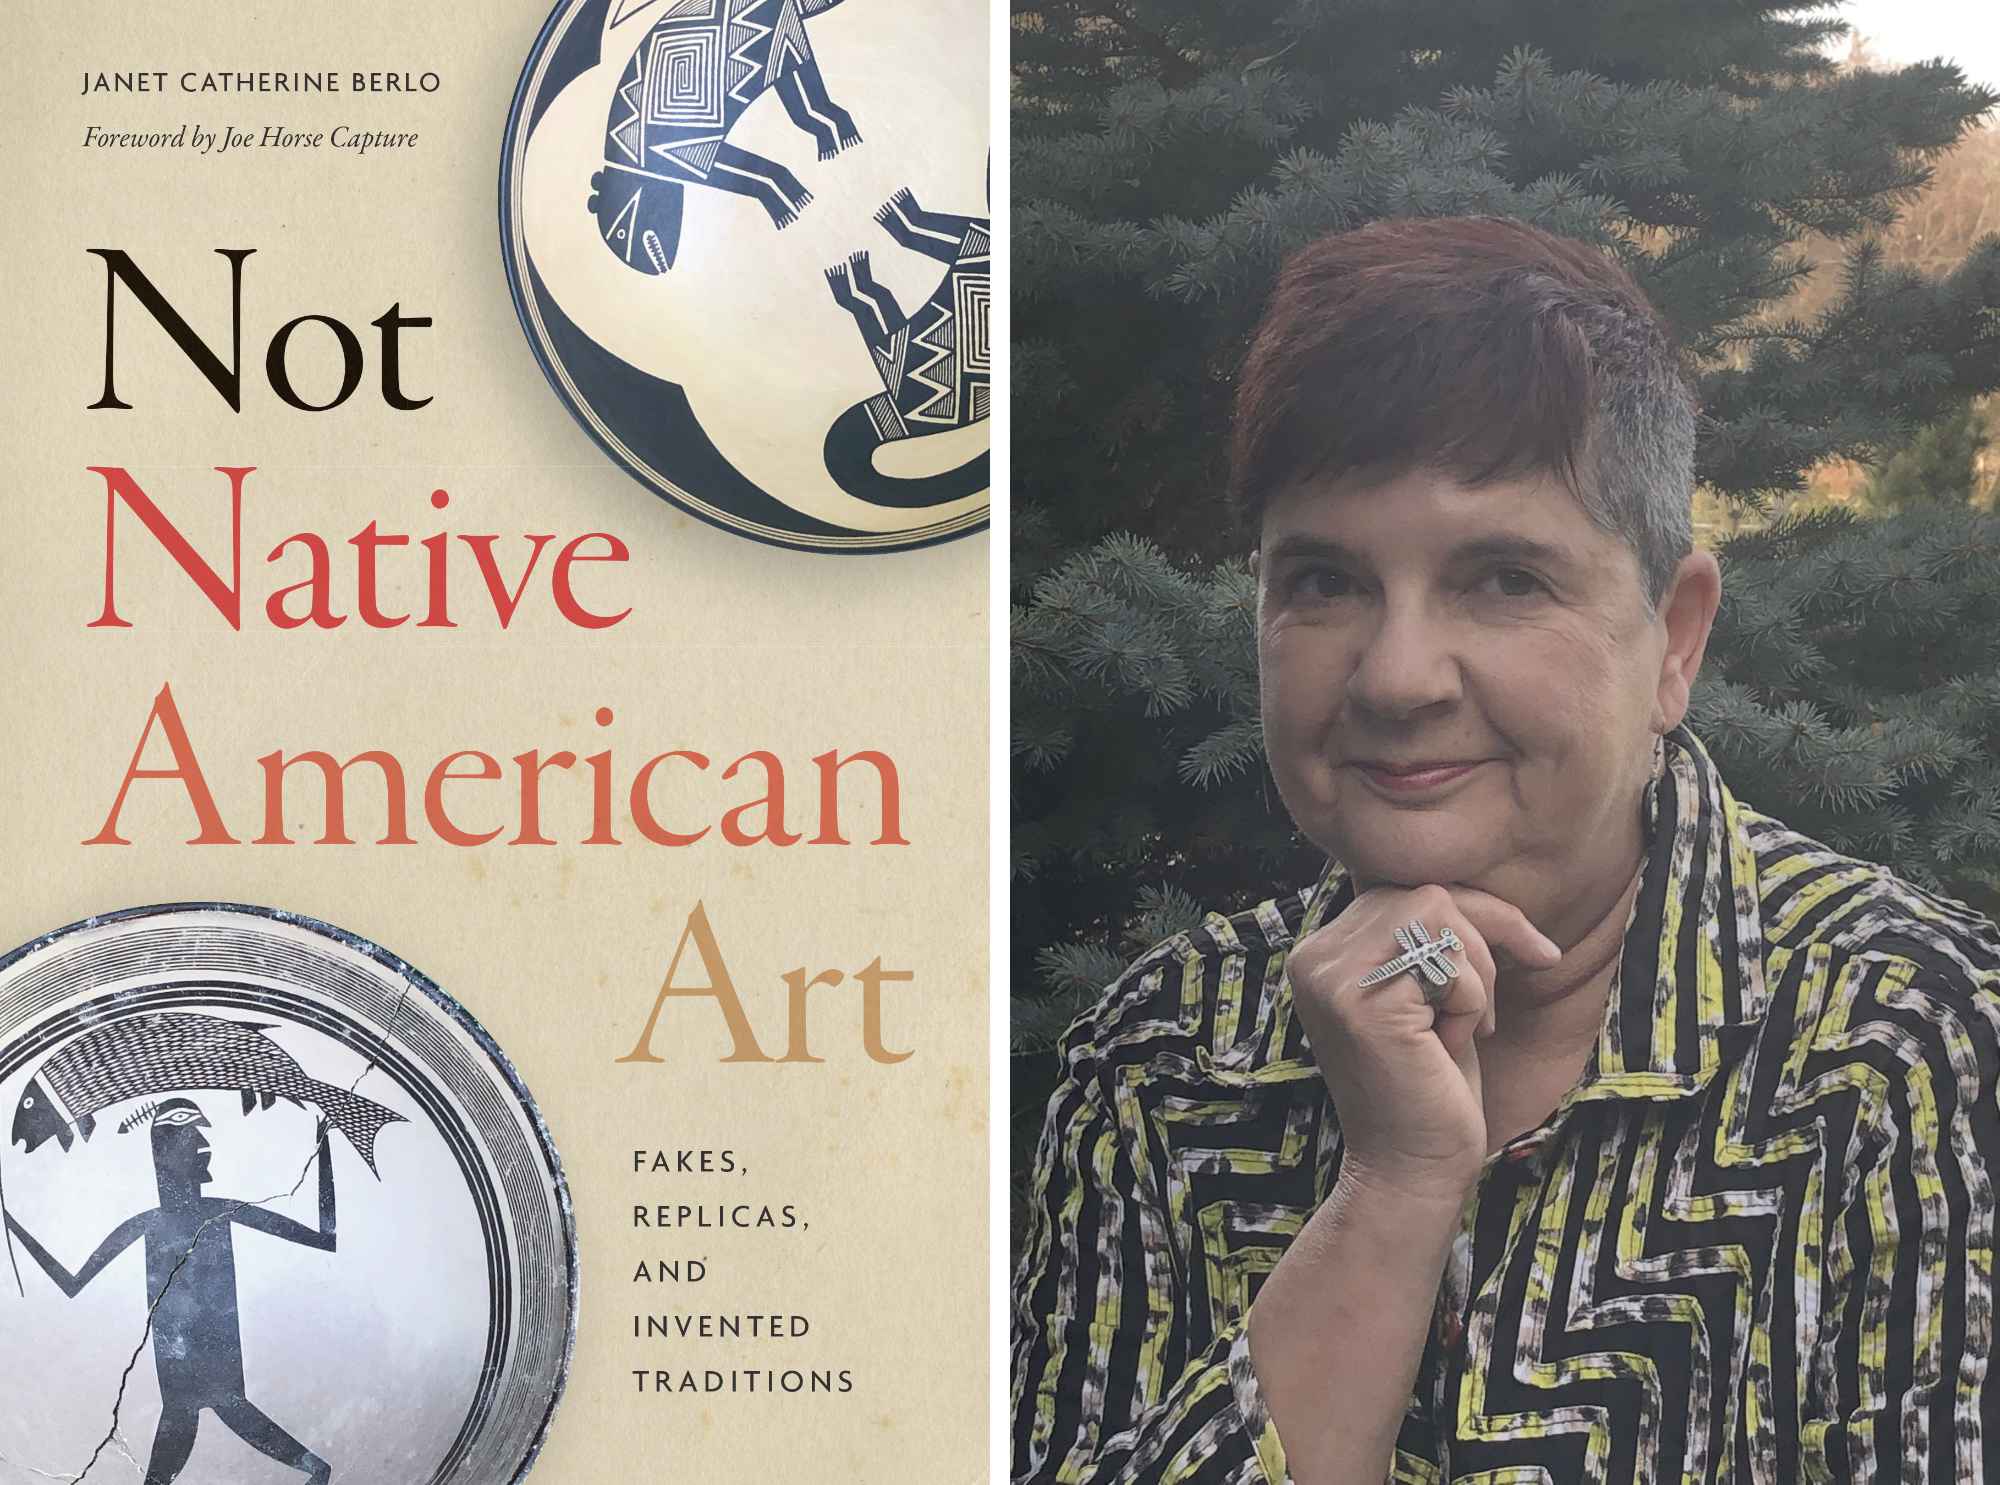 Diptych featuring the book cover art for Not Native American Art and a headshot of author Janet Berlo.